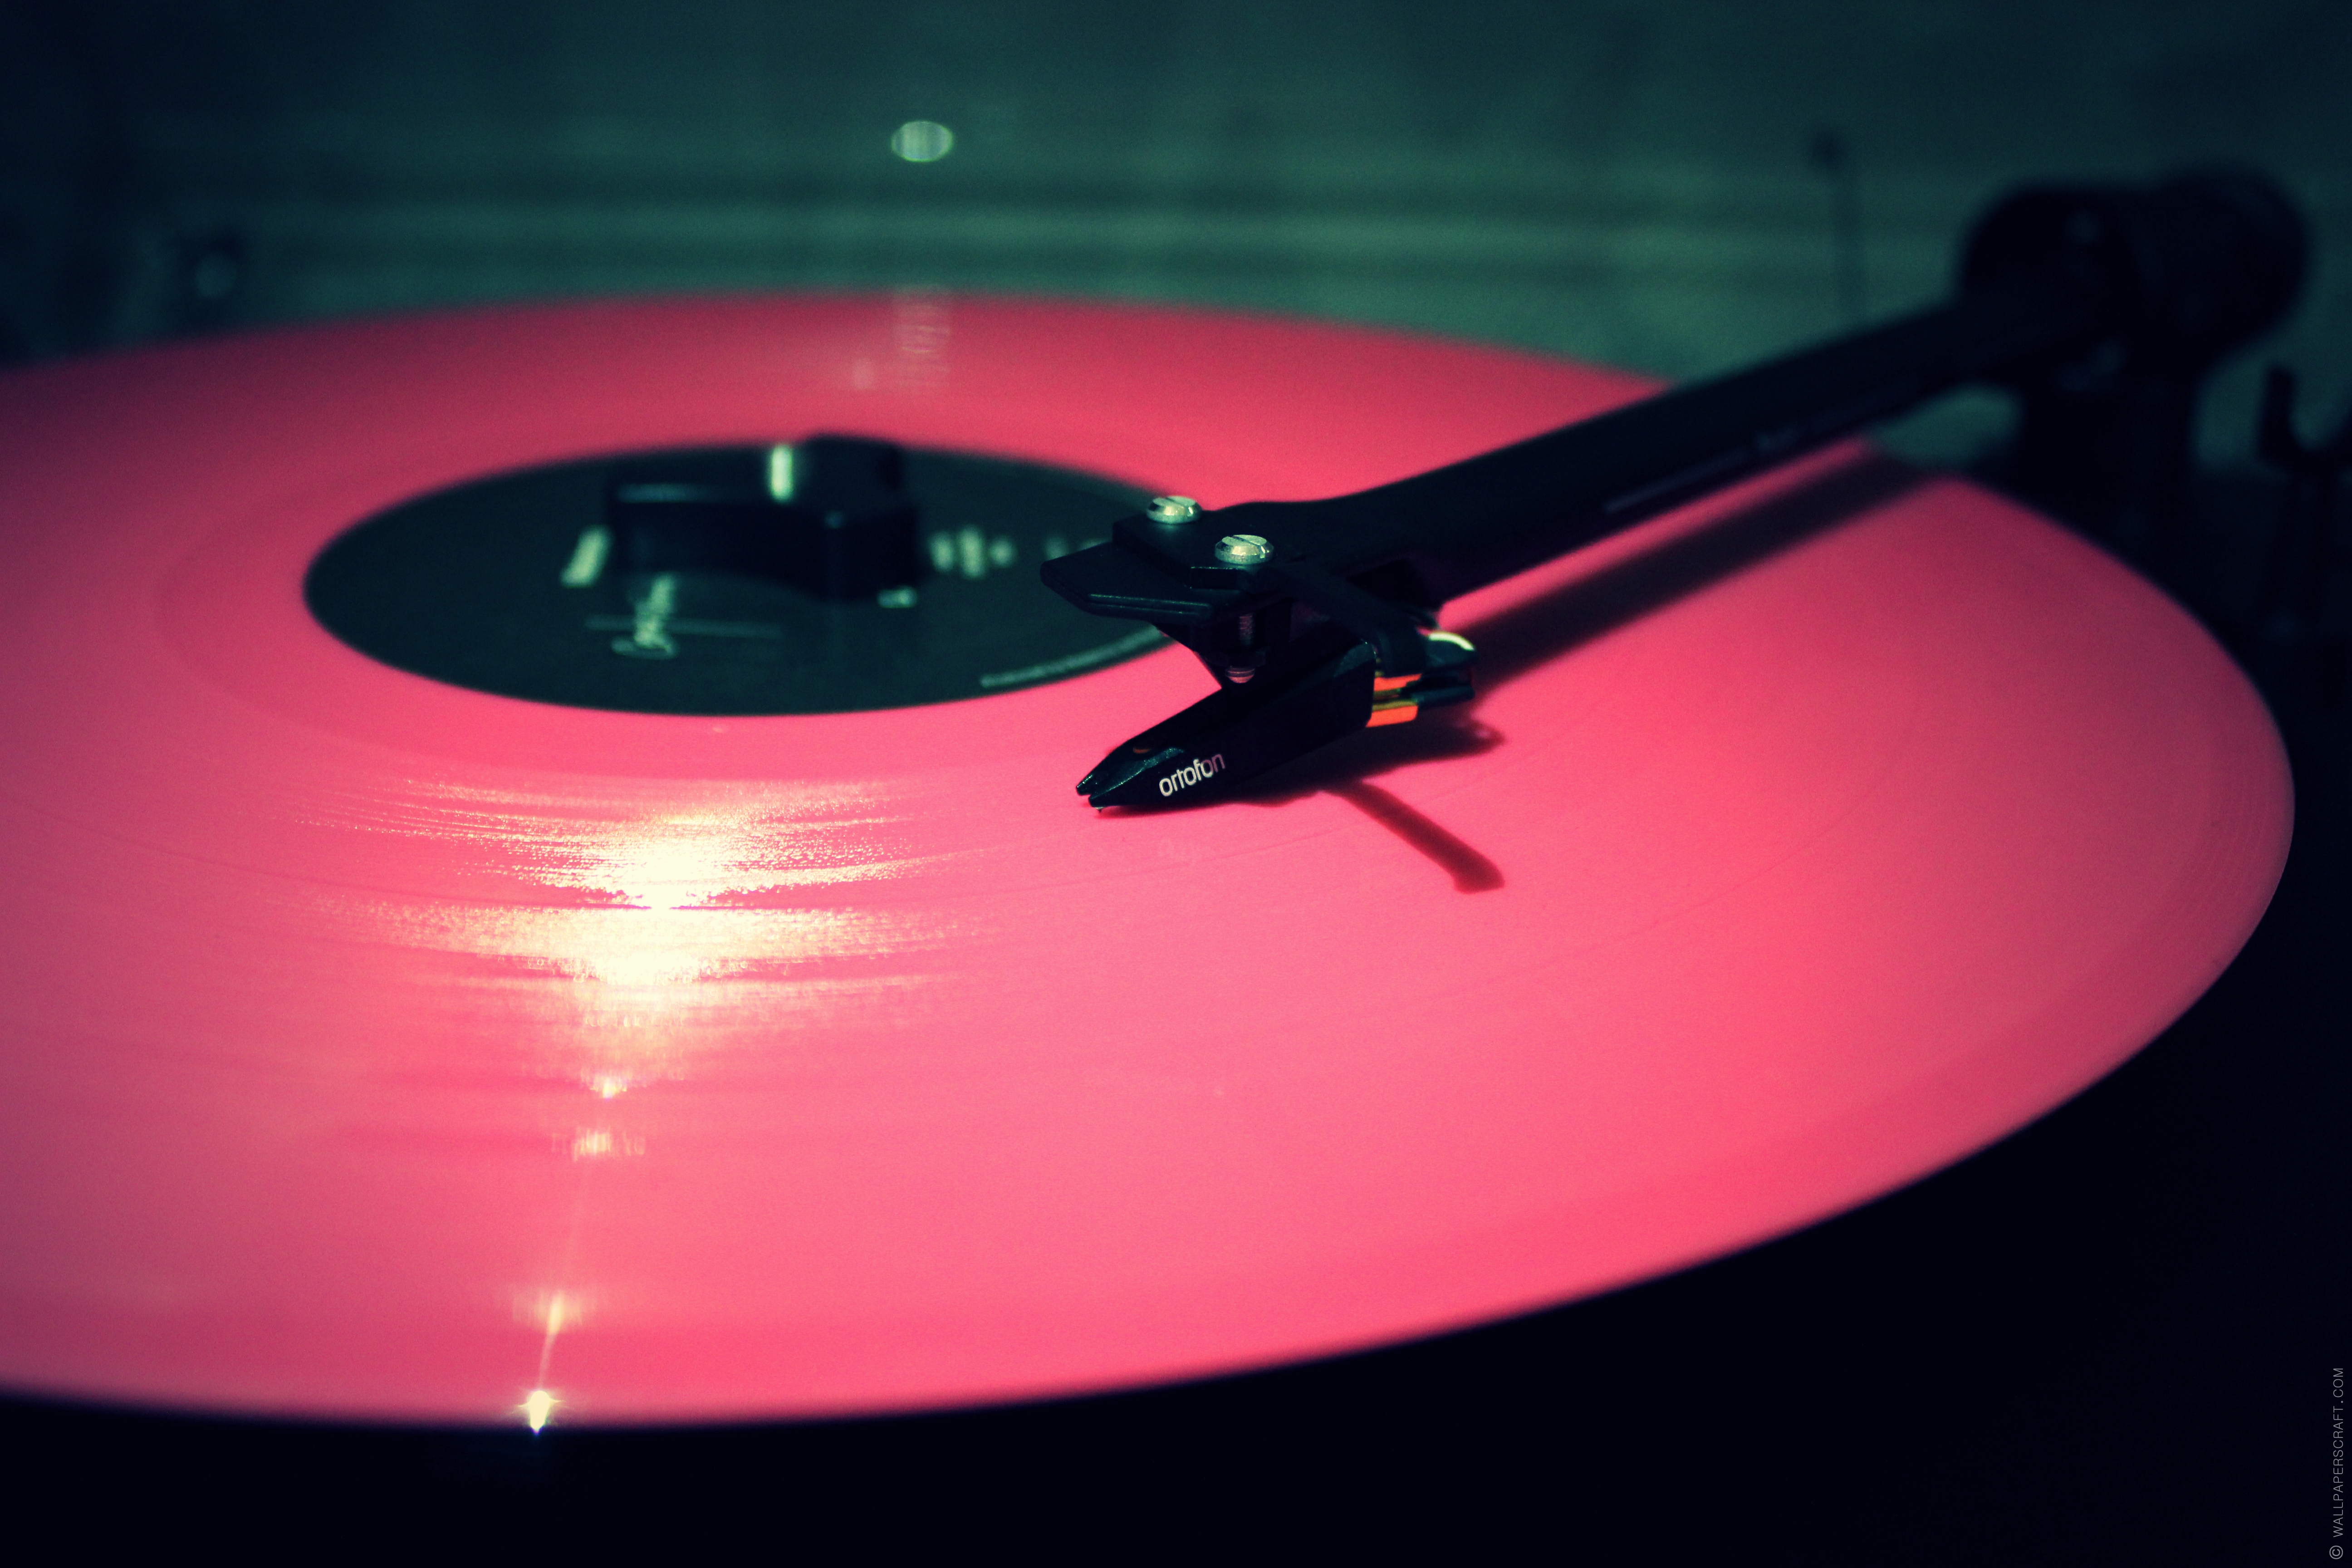 137876 download wallpaper music, needle, pink, plate, vinyl, turntable, record player screensavers and pictures for free